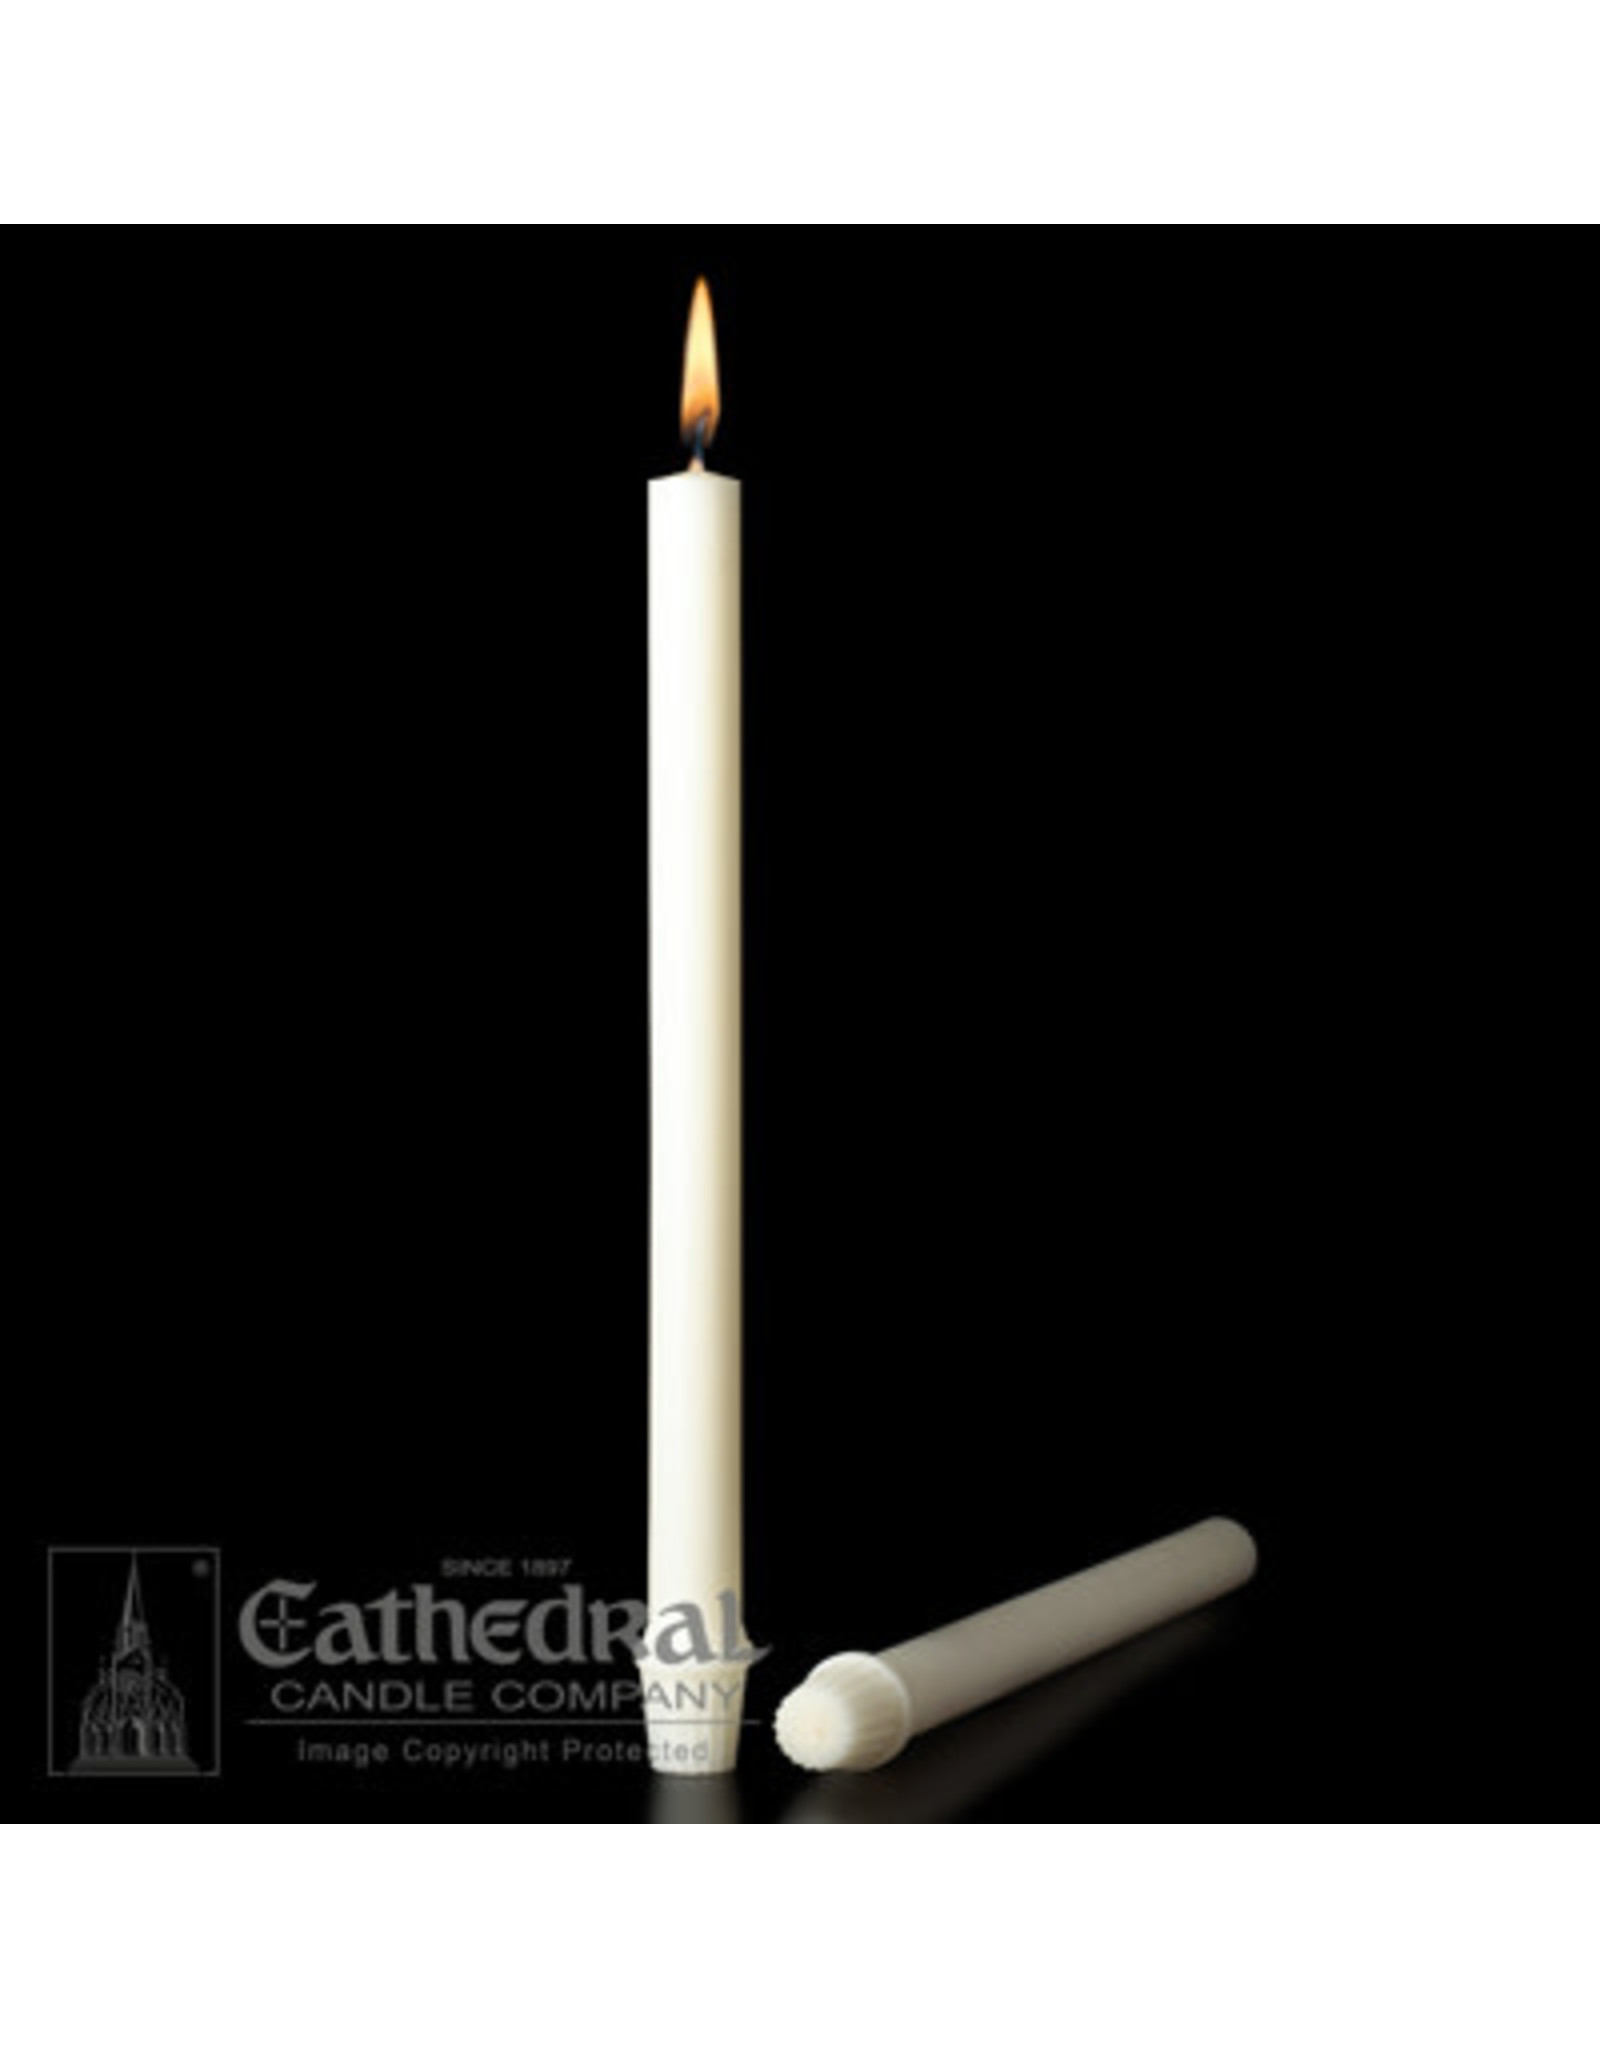 Cathedral Candle 51% Beeswax Altar Candles 1-1/8"x10.5" SFE (18)